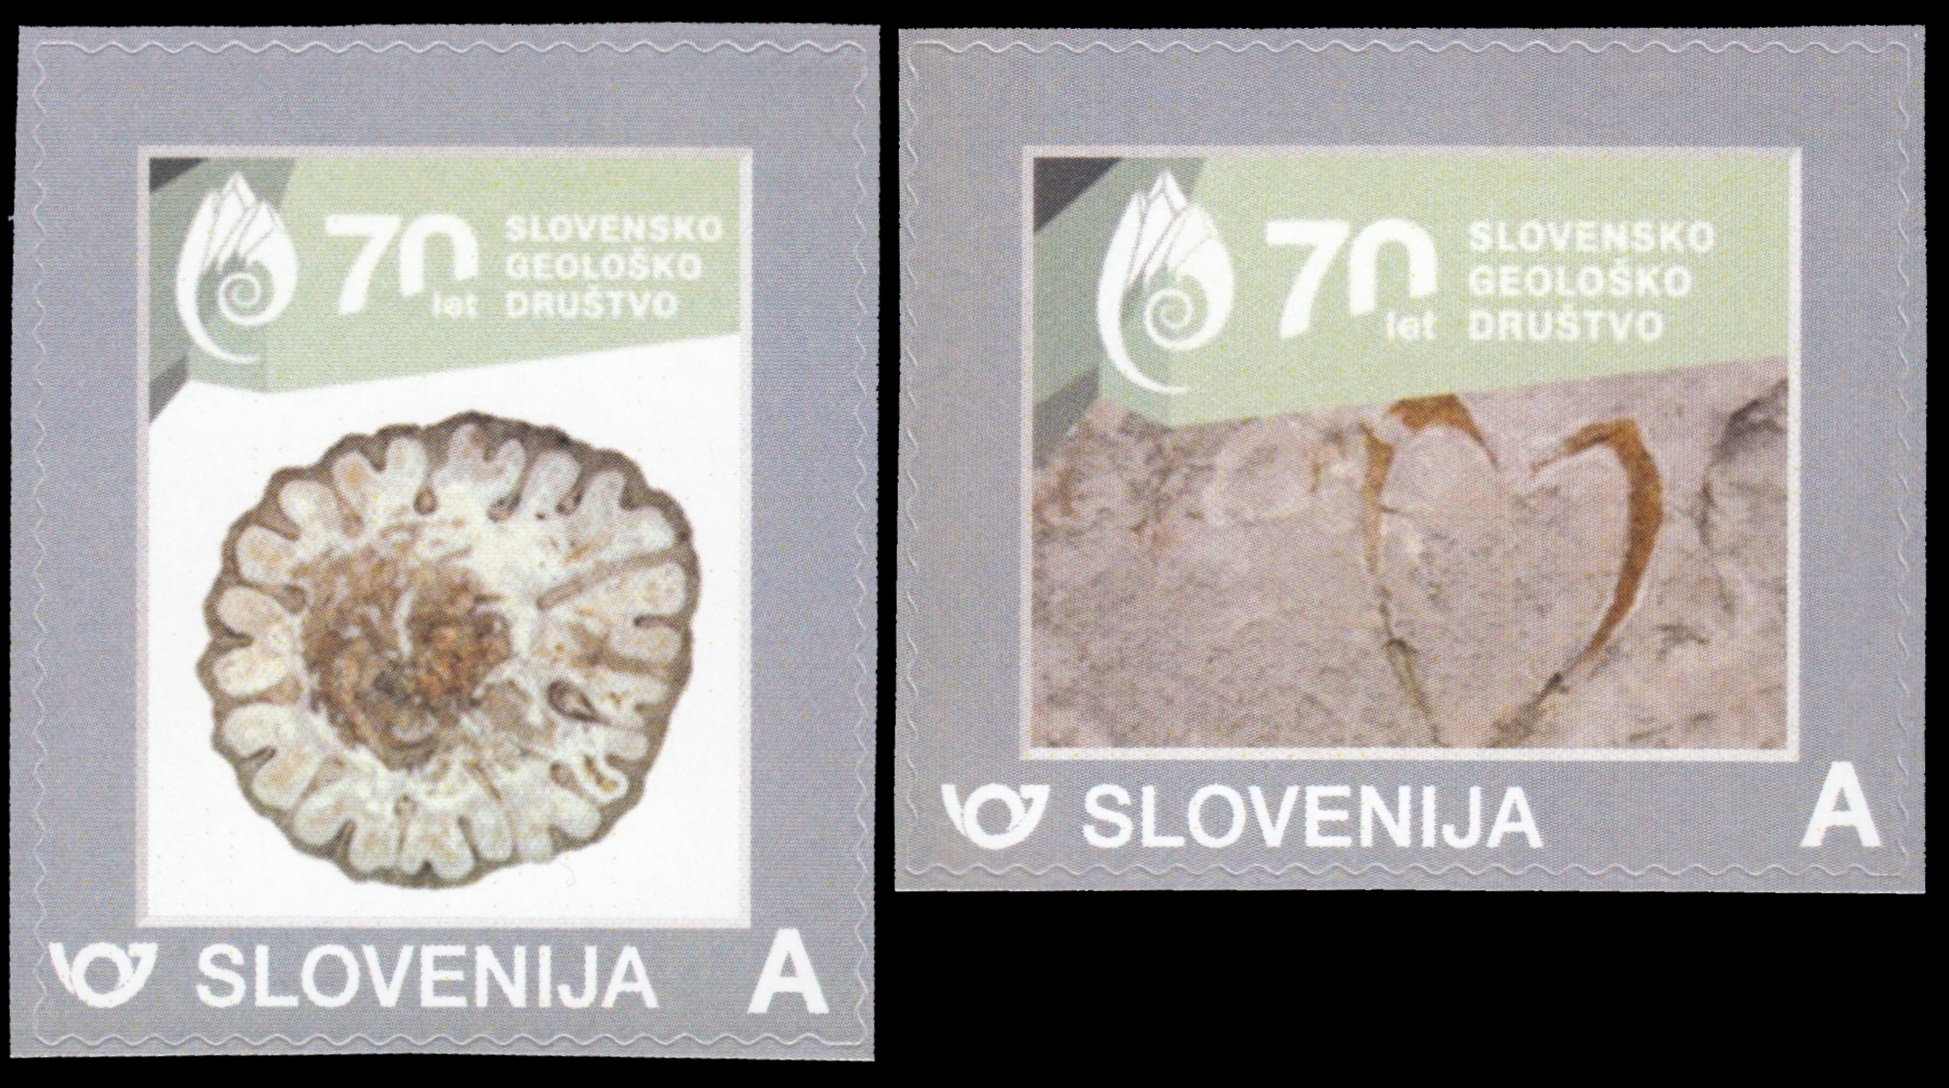 Fossil on 70 years of Slovenian Geological Society personalized stamps of Slovenia 2021